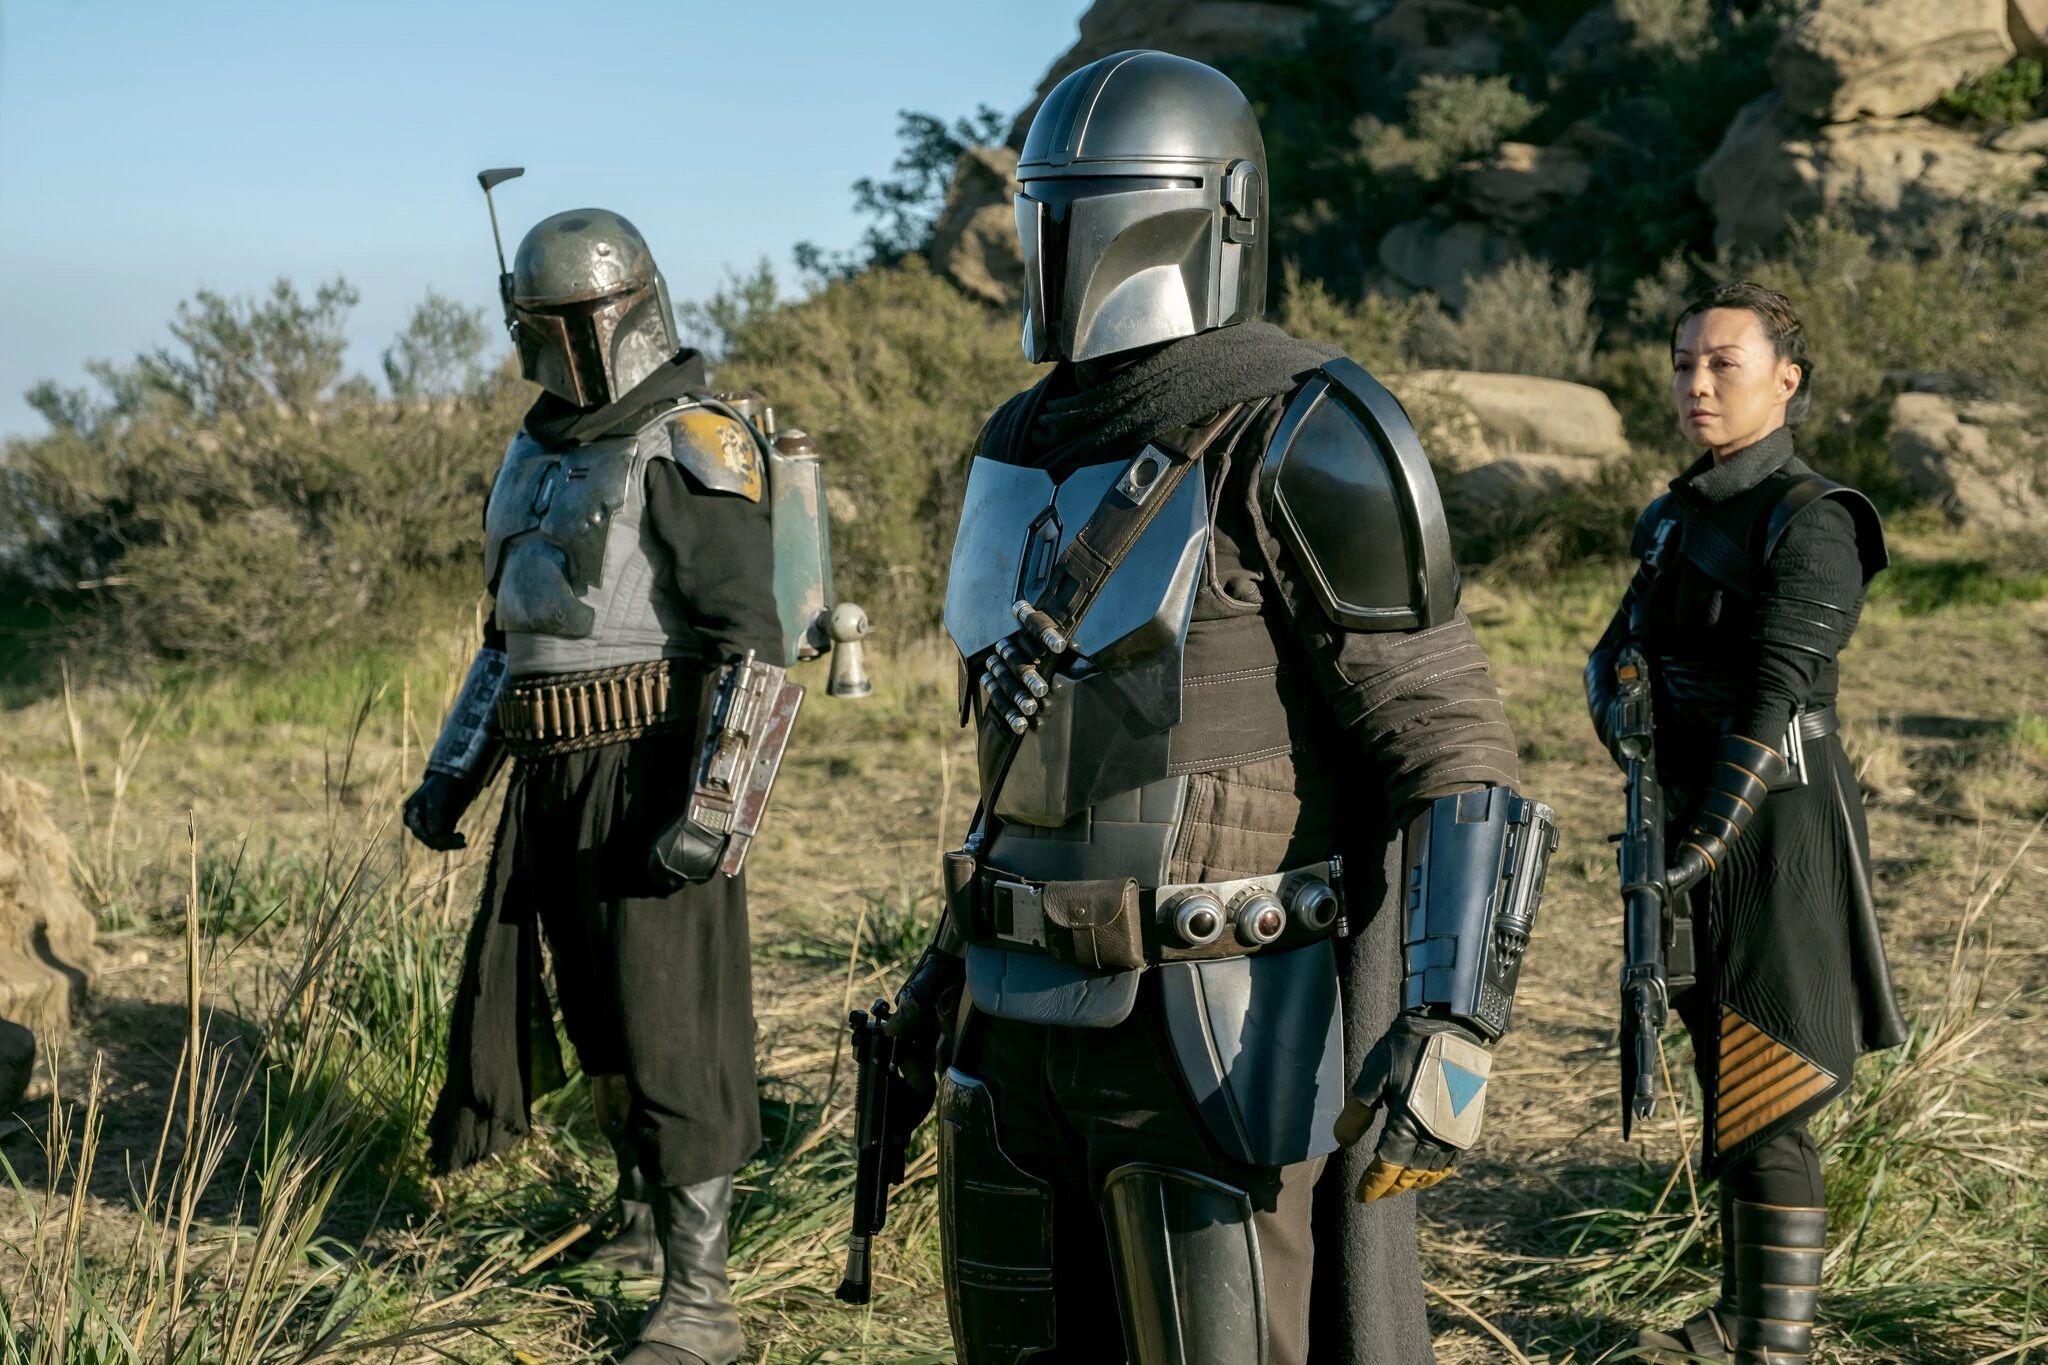 The Mandalorian season 3 release date, cast, and more